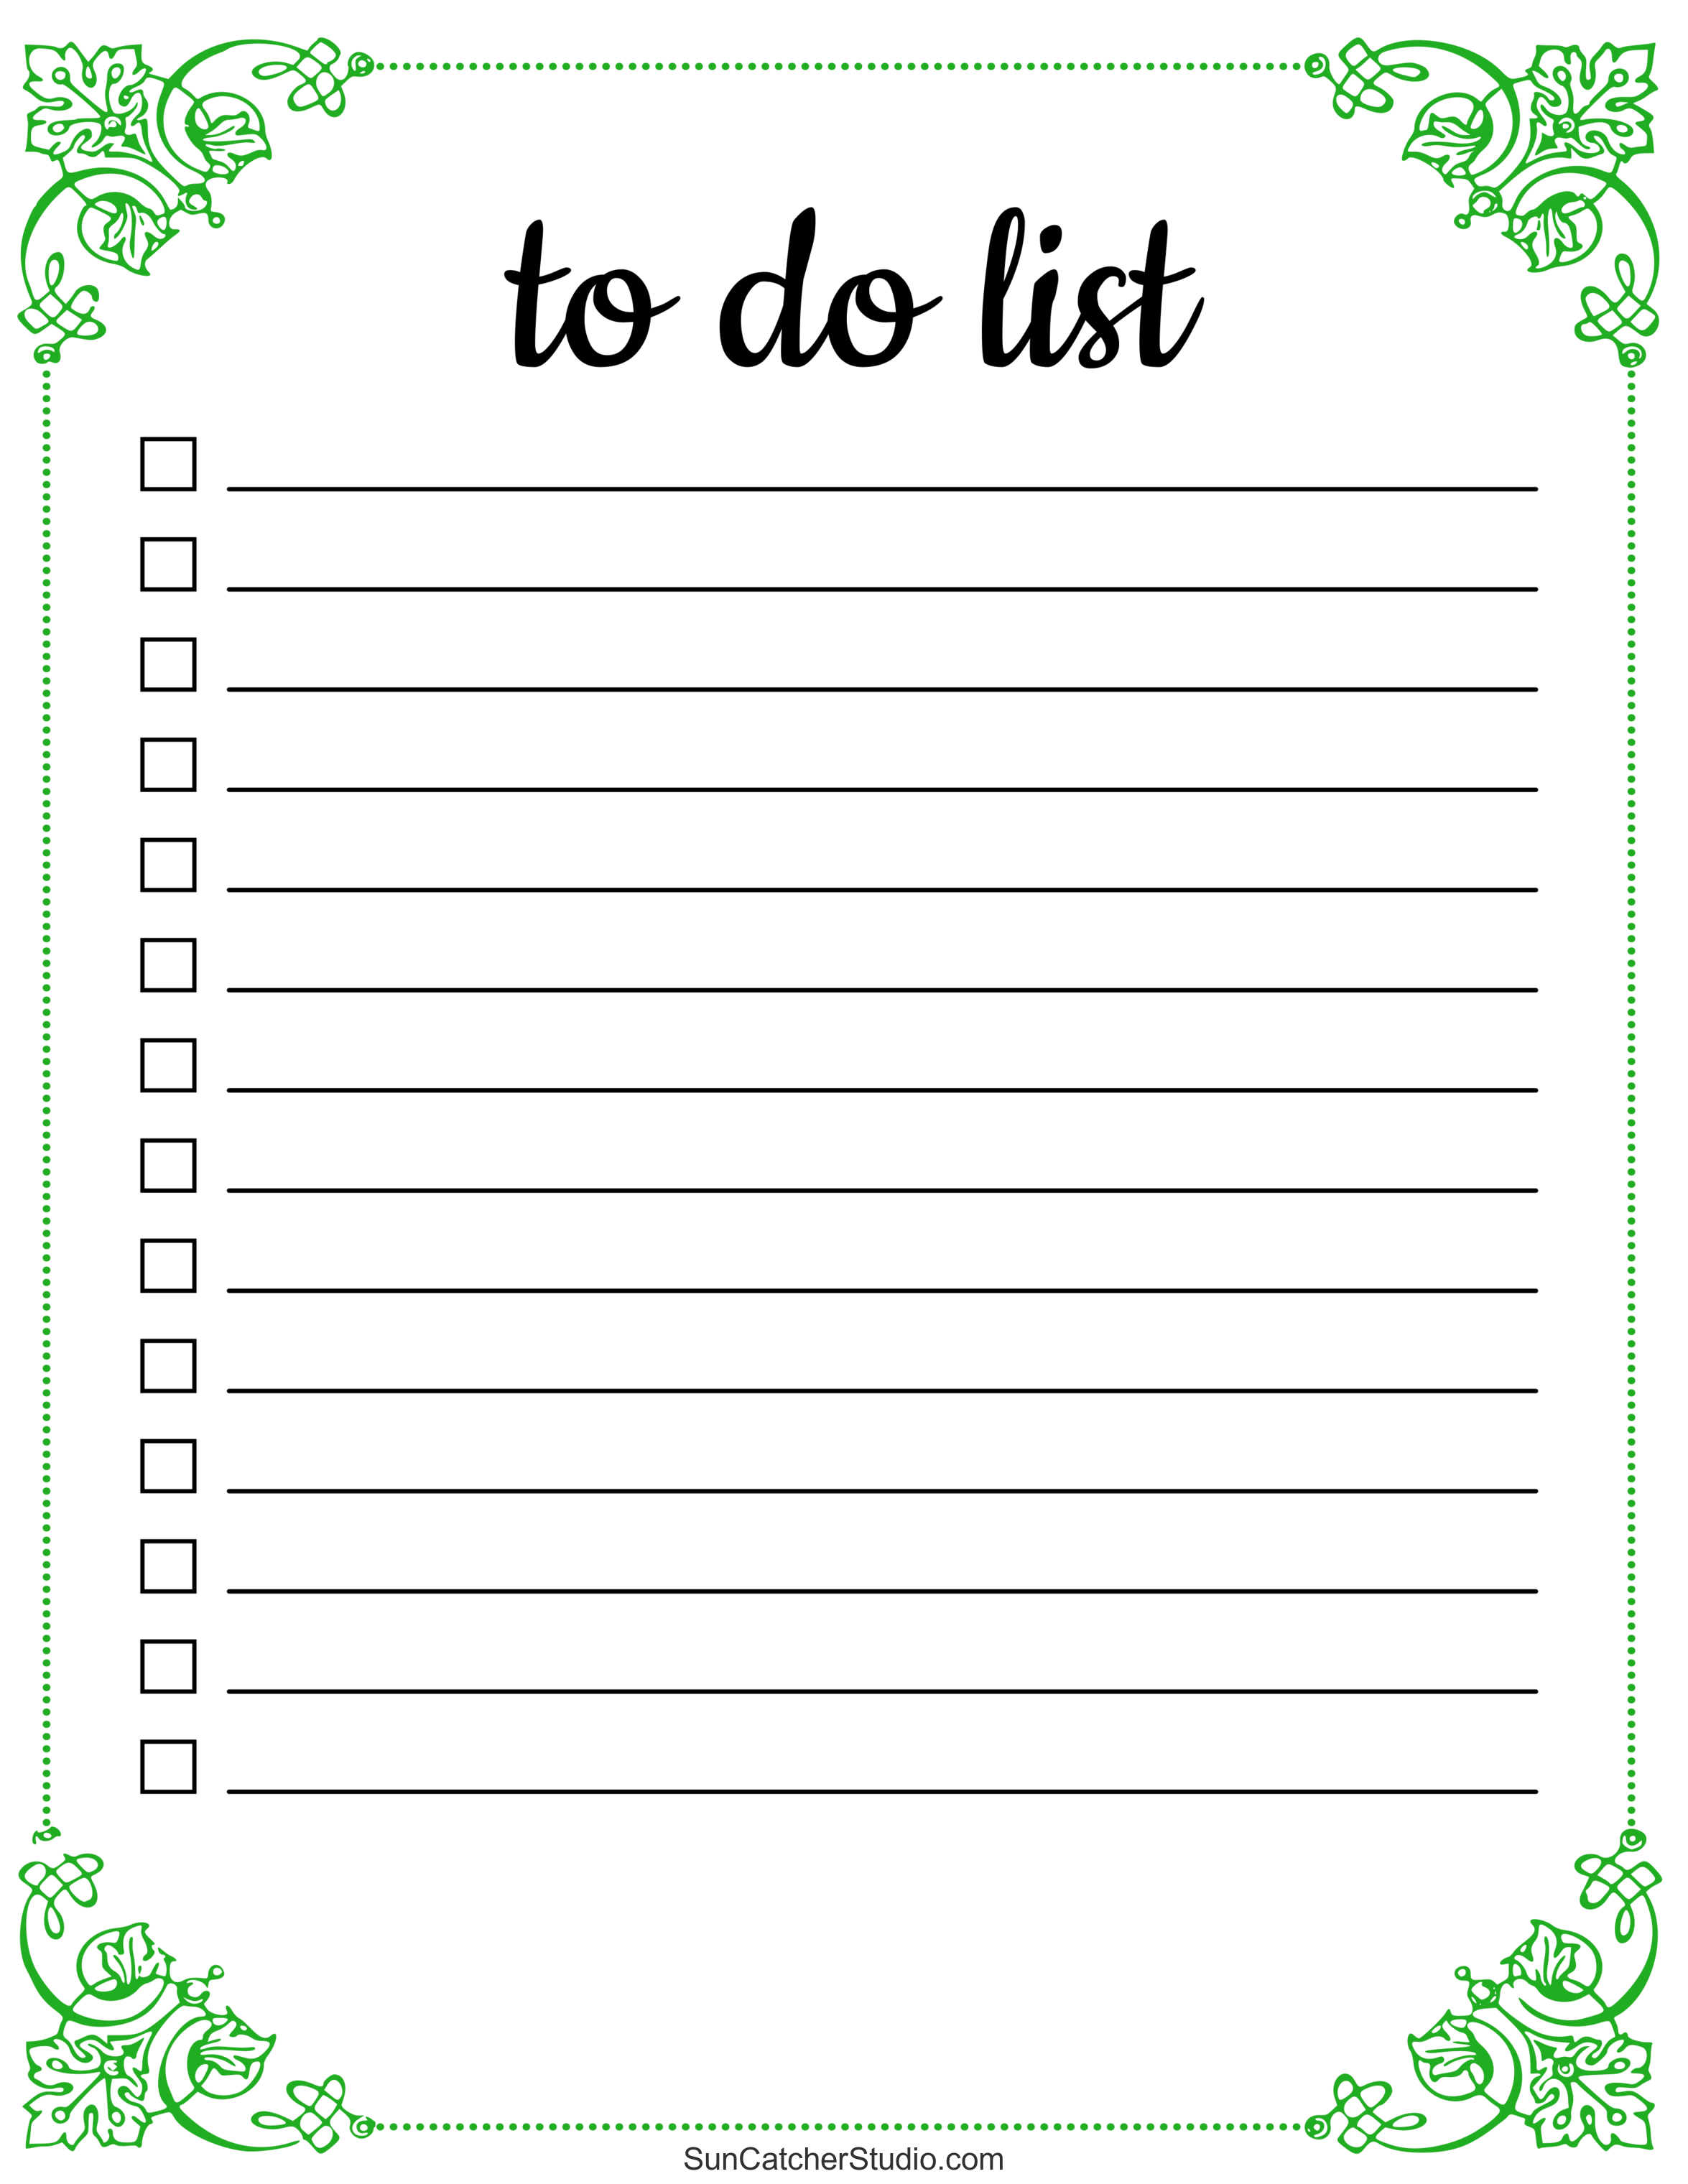 To Do List (Free Printable PDF Templates) – Things To Do – DIY Projects,  Patterns, Monograms, Designs, Templates